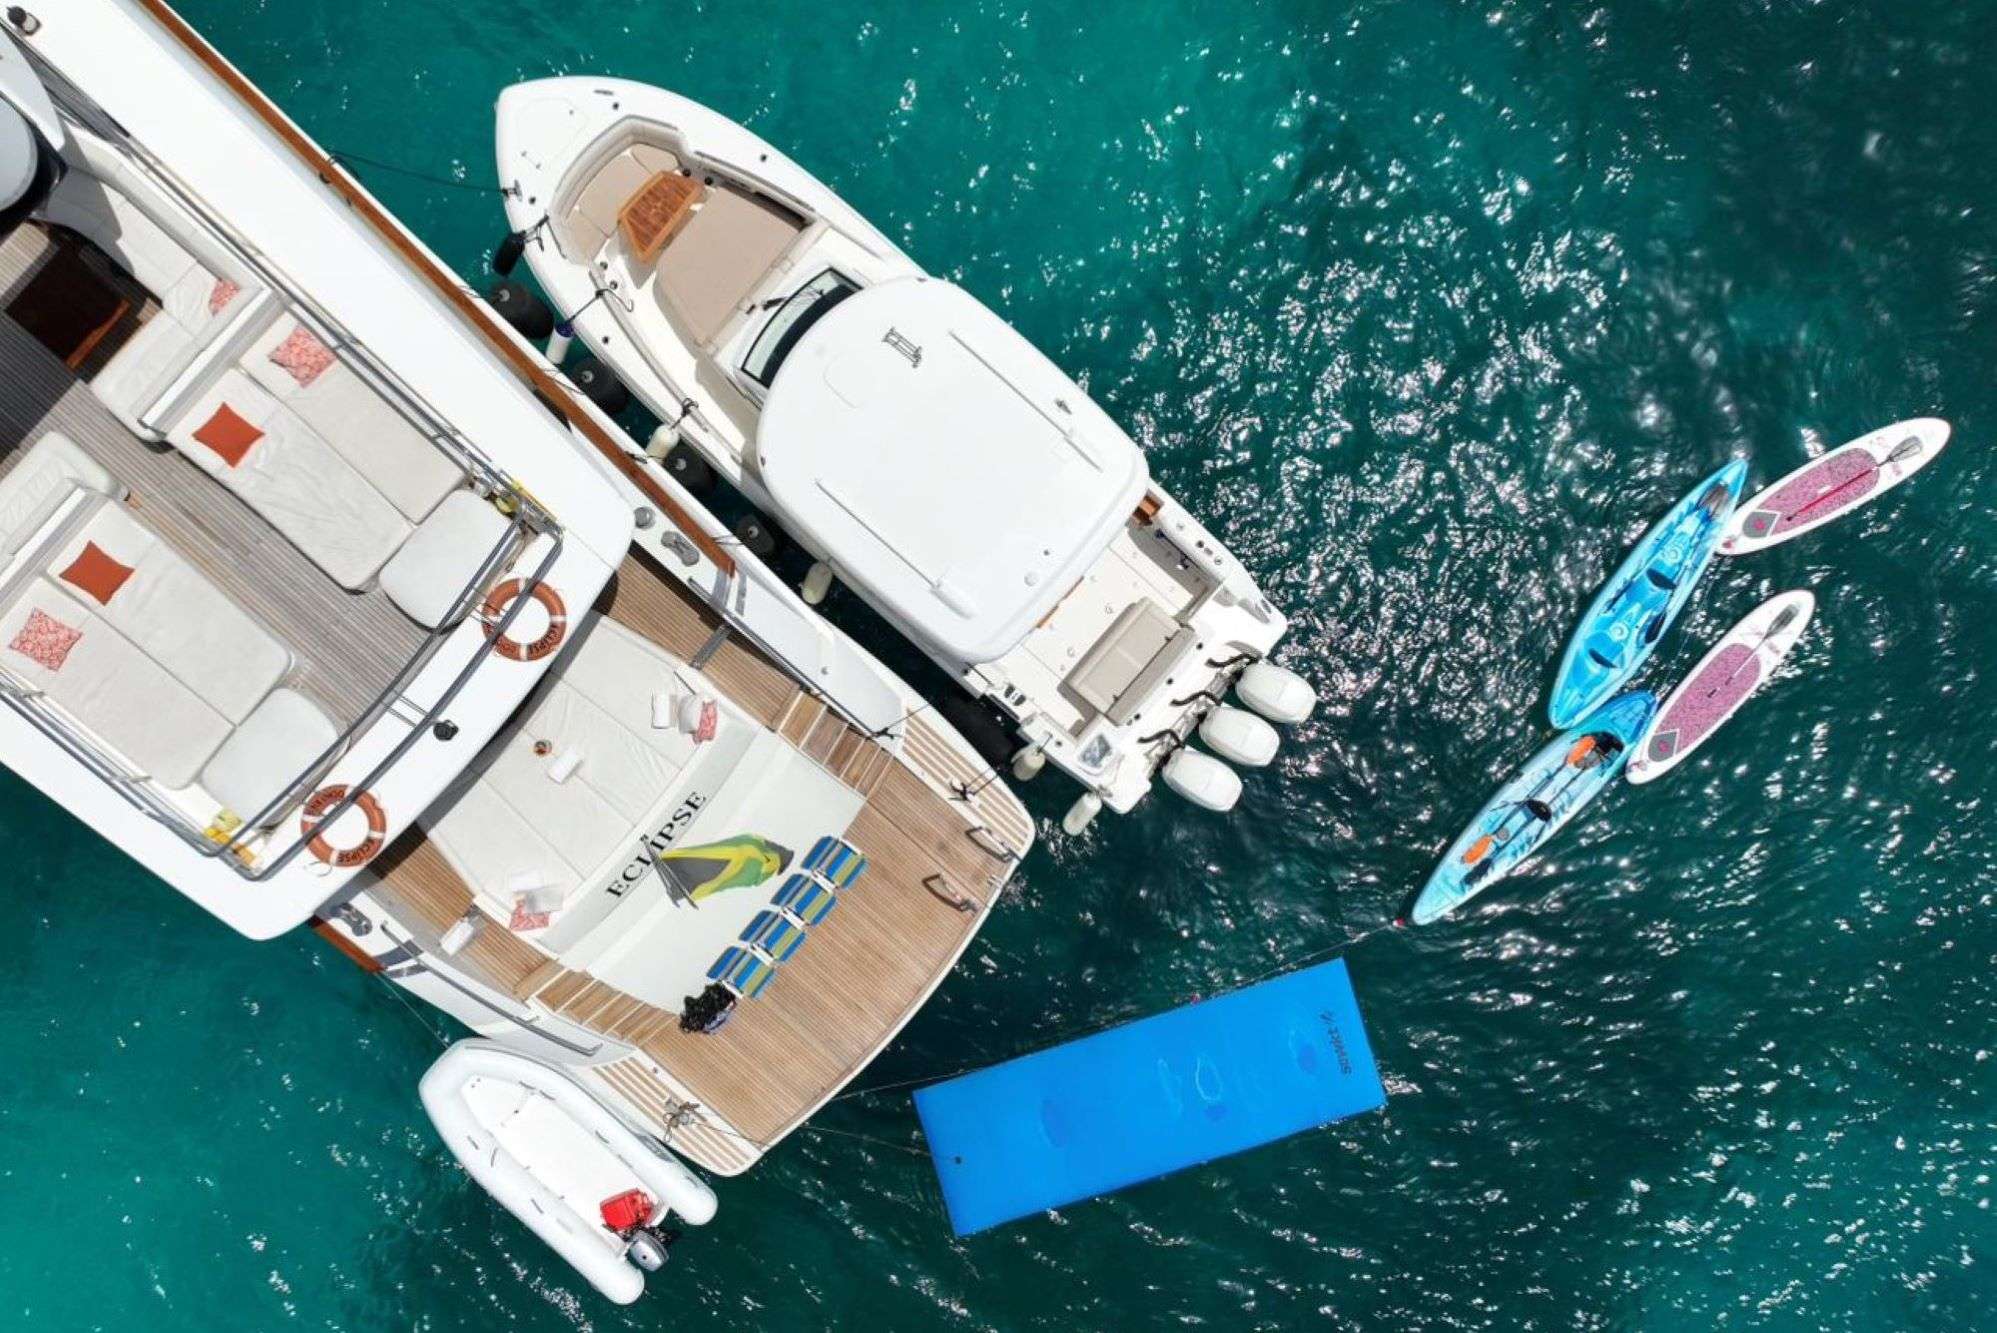 ECLIPSE 114 Yacht Charter - Fun Water Toys!